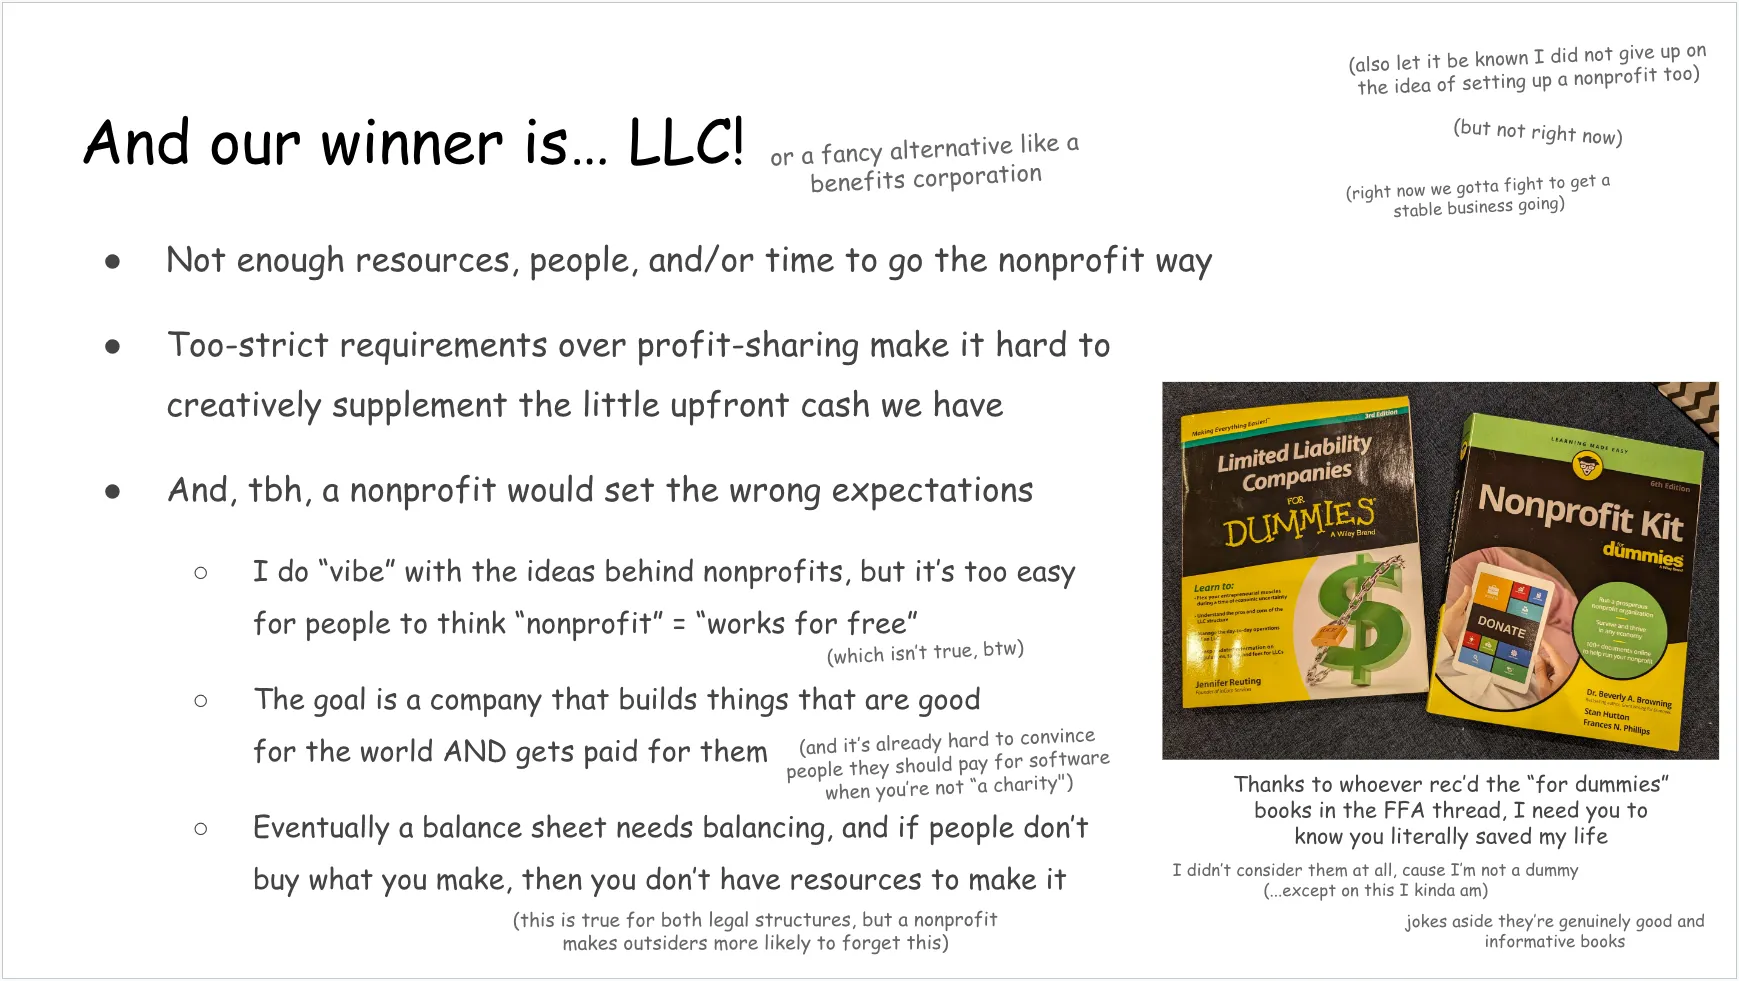 Another slide, talking about why LLC was chosen. Full text follows:

And our winner is… LLC! (or a fancy alternative like a benefits corporation)

In a top corner:
(also let it be known I did not give up on the idea of setting up a nonprofit too)
(but not right now)
(right now we gotta fight to get a stable business going)

Listed under the “winner is LLC” heading:
Not enough resources, people, and/or time to go the nonprofit way
Too-strict requirements over profit-sharing make it hard to creatively supplement the little upfront cash we have
And, tbh, a nonprofit would set the wrong expectations

Under that last bullet point:
I do “vibe” with the ideas behind nonprofits, but it’s too easy for people to think “nonprofit” = “works for free” (which isn’t true, btw)
The goal is a company that builds things that are good for the world AND gets paid for them (and it’s already hard to convince people they should pay for software when you’re not “a charity")
Eventually a balance sheet needs balancing, and if people don’t buy what you make, then you don’t have resources to make it (this is true for both legal structures, but a nonprofit makes outsiders more likely to forget this)

On the side: a photo of a “Limited Liability Companies for Dummies” book and a “Nonprofit Kit for Dummies” book
Text underneath: Thanks to whoever rec’d the “for dummies” books in the FFA thread, I need you to know you literally saved my life
I didn’t consider them at all, cause I’m not a dummy
(...except on this I kinda am)
jokes aside they’re genuinely good and informative books
